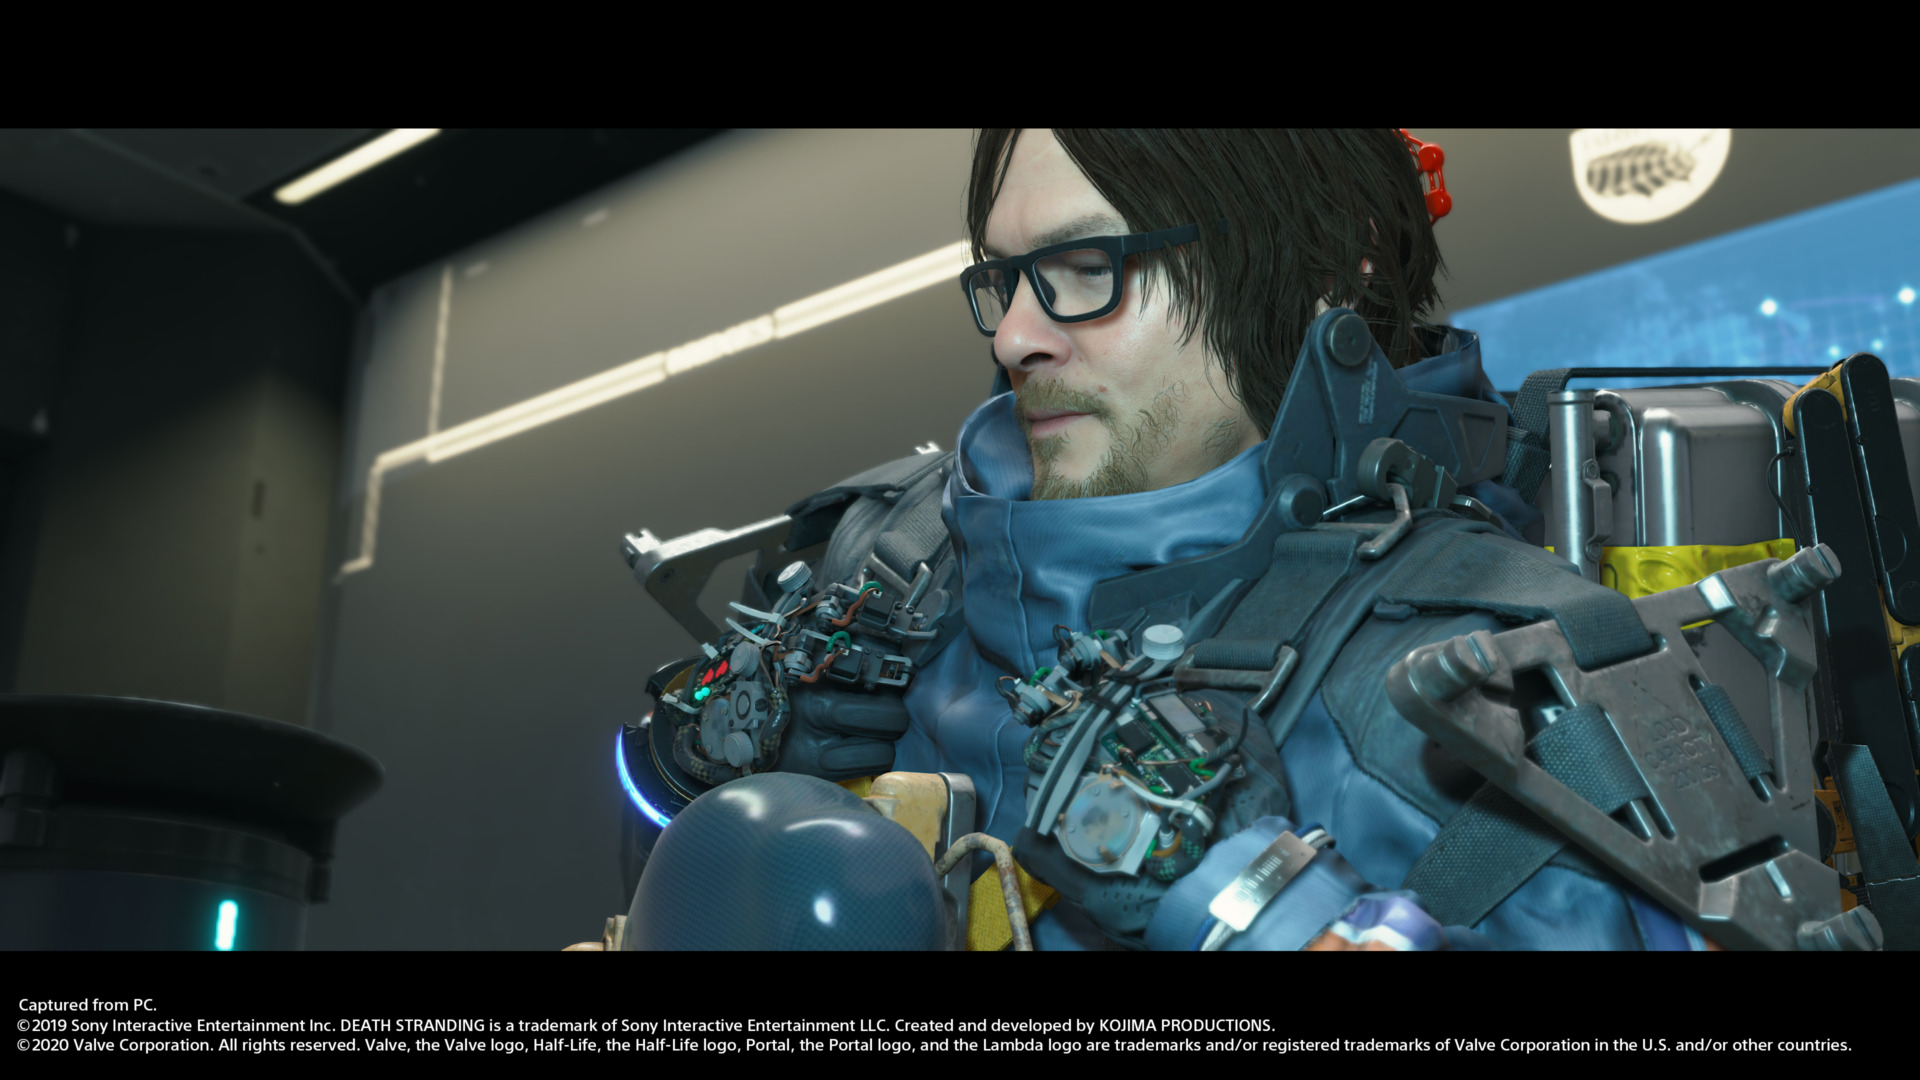 Death Stranding system requirements